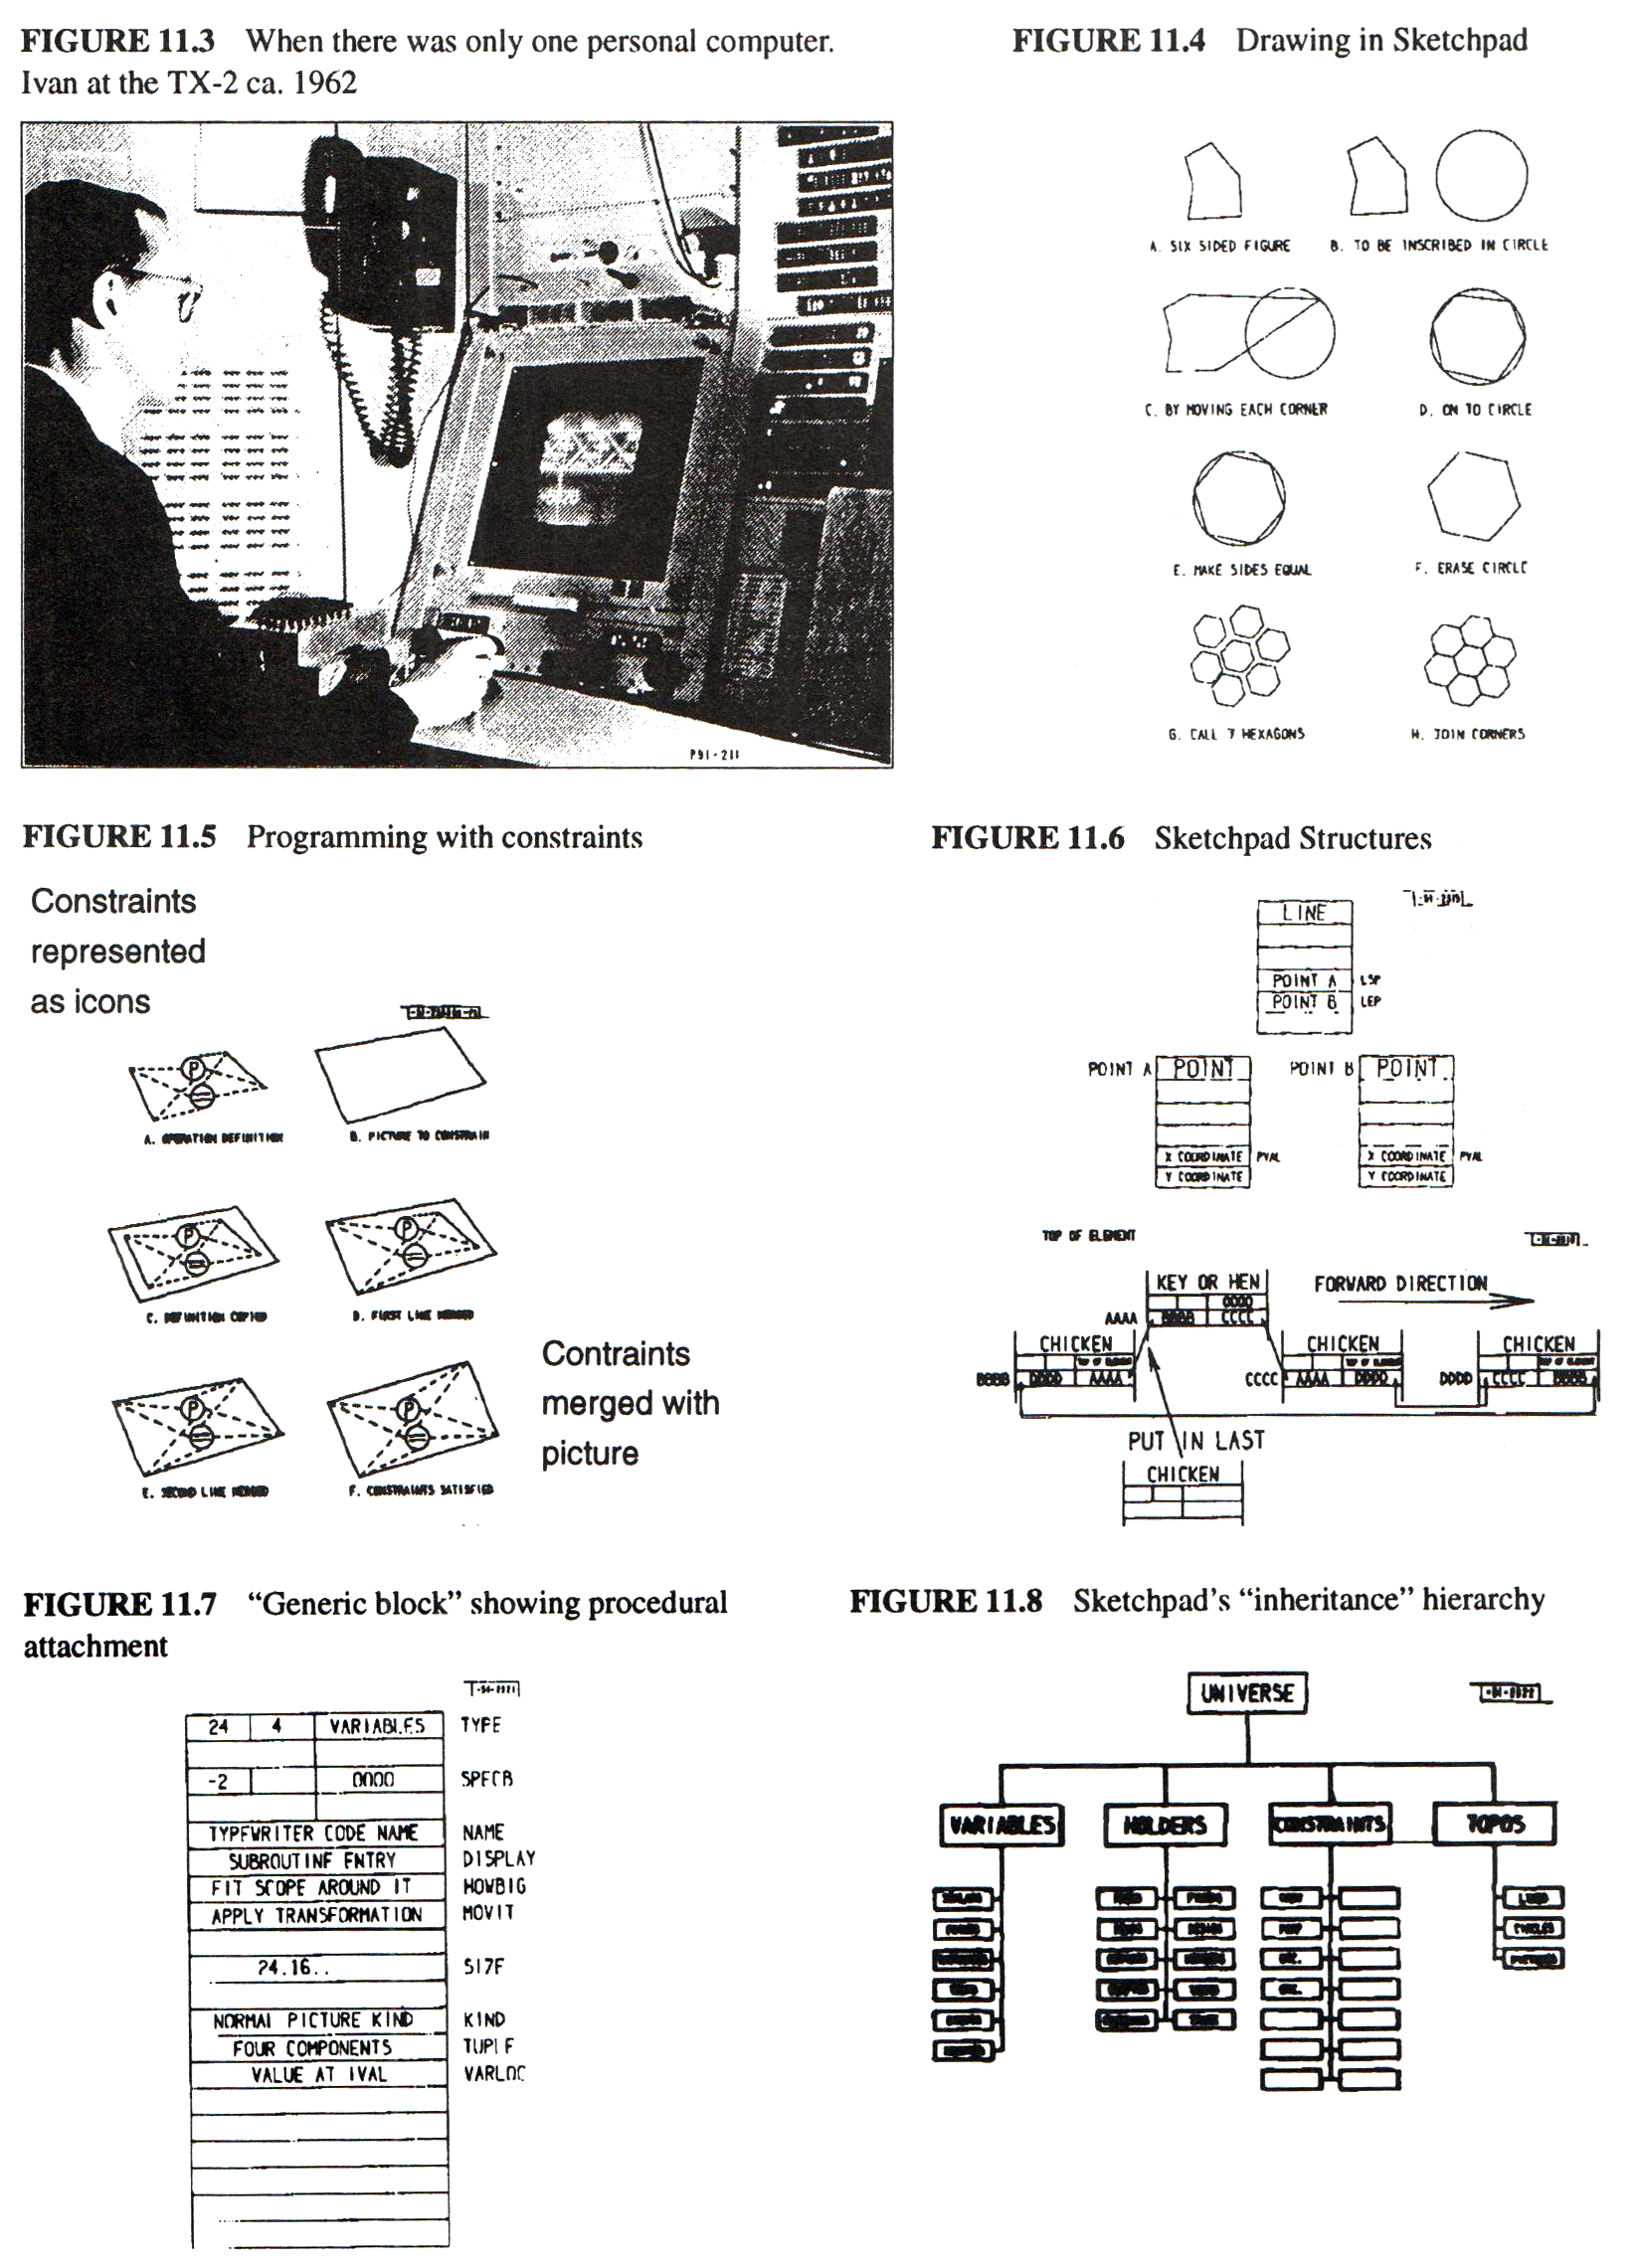 Sketchpad a Man-Machine Graphical Communication System - Ivan E.  Sutherland, 1964